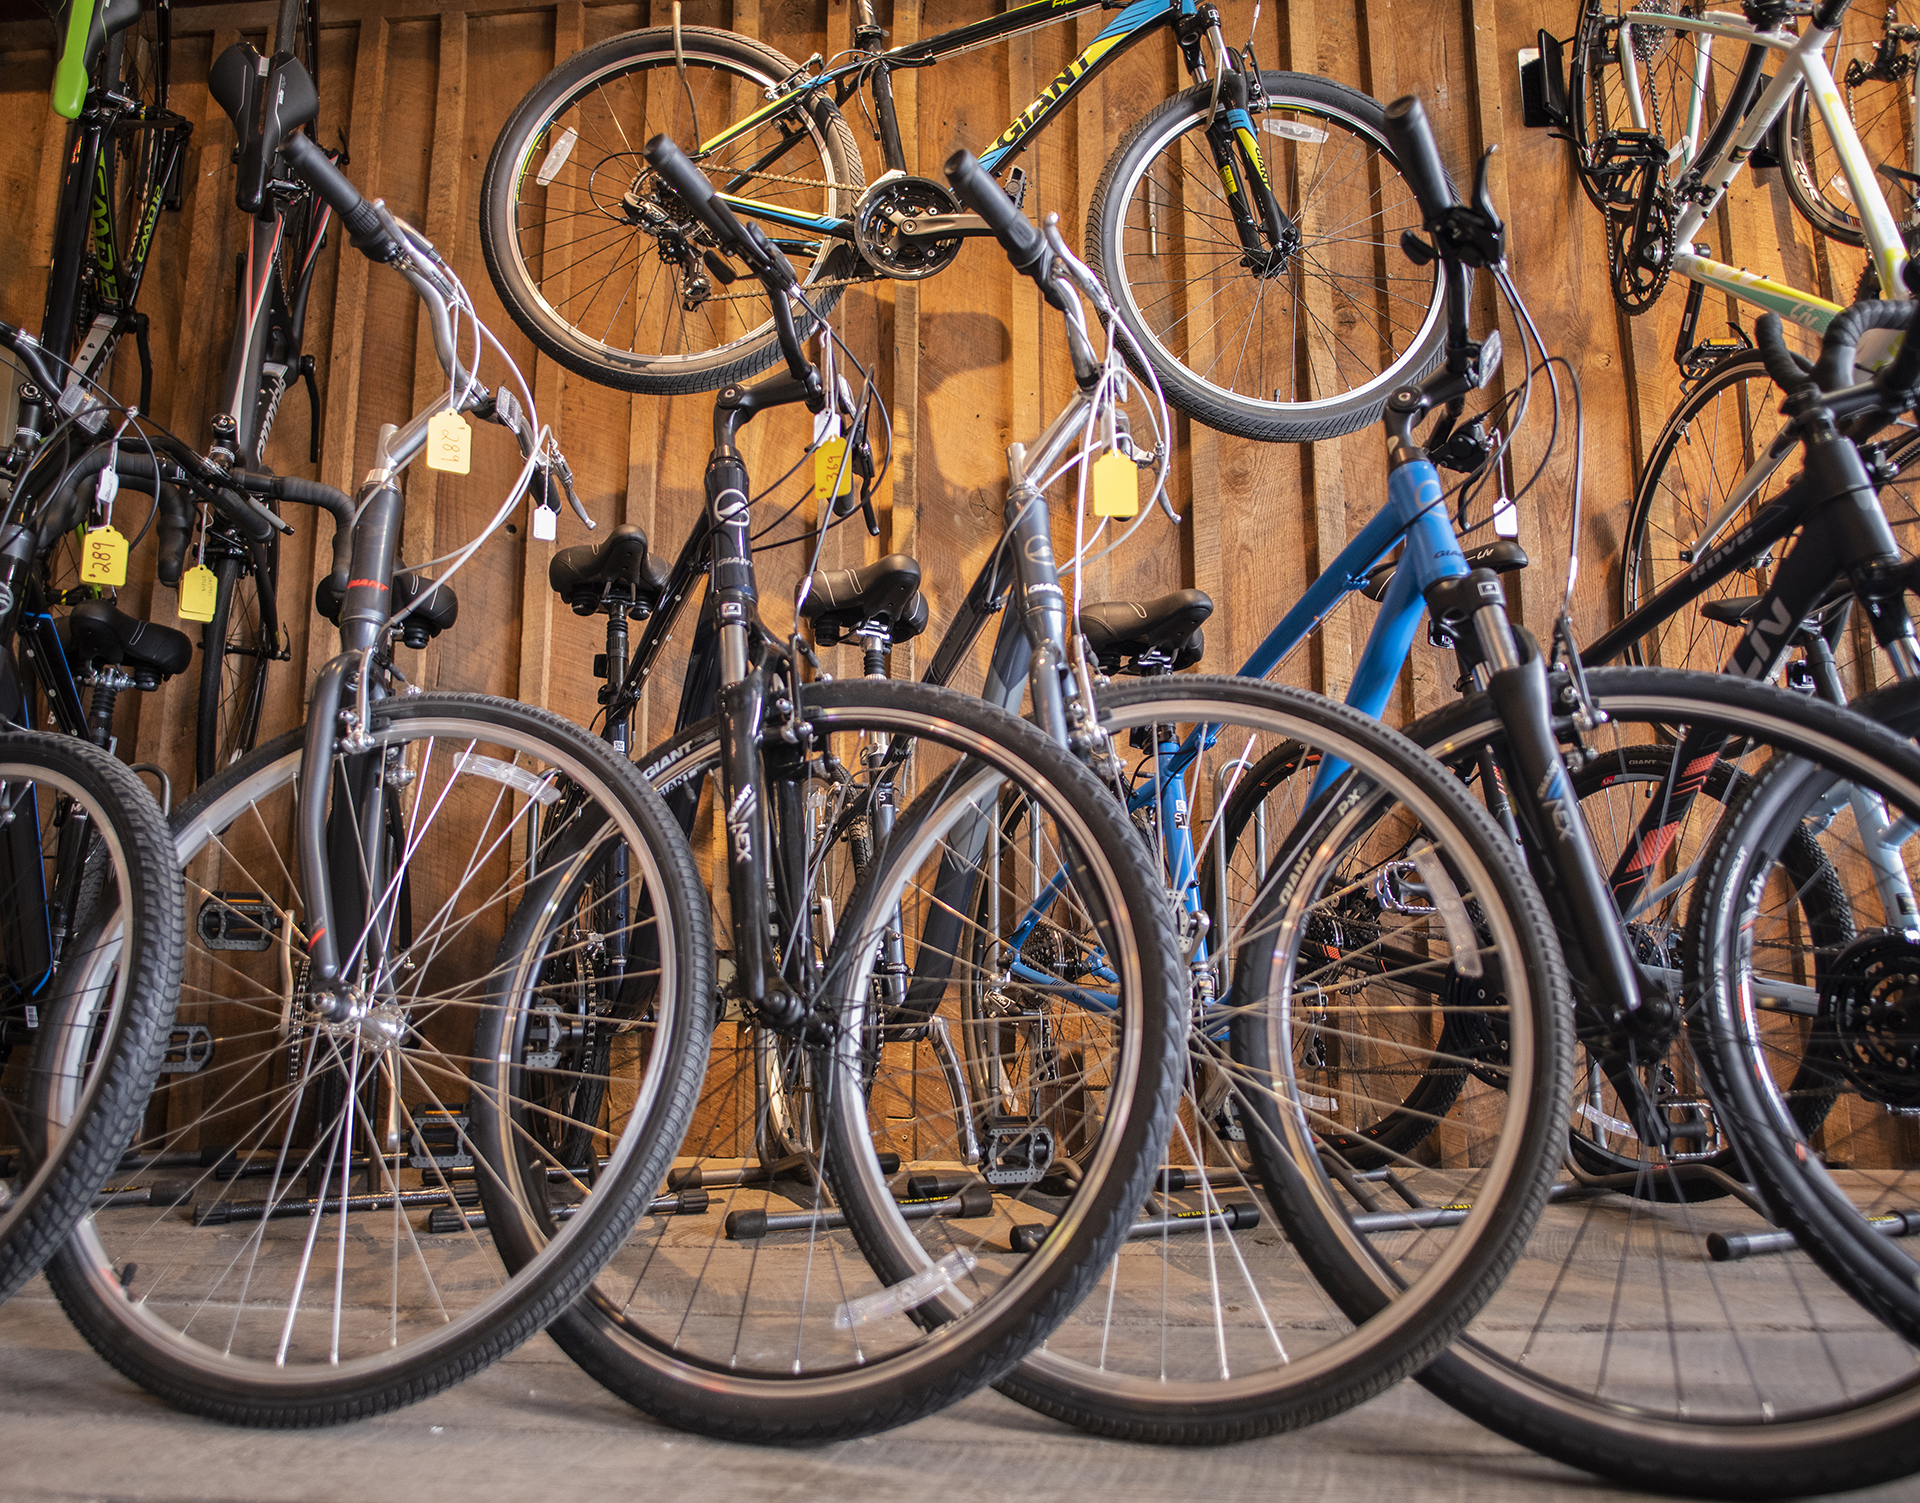  A portrait of bikes at Cycle Path bike shop in Athens, Ohio. 